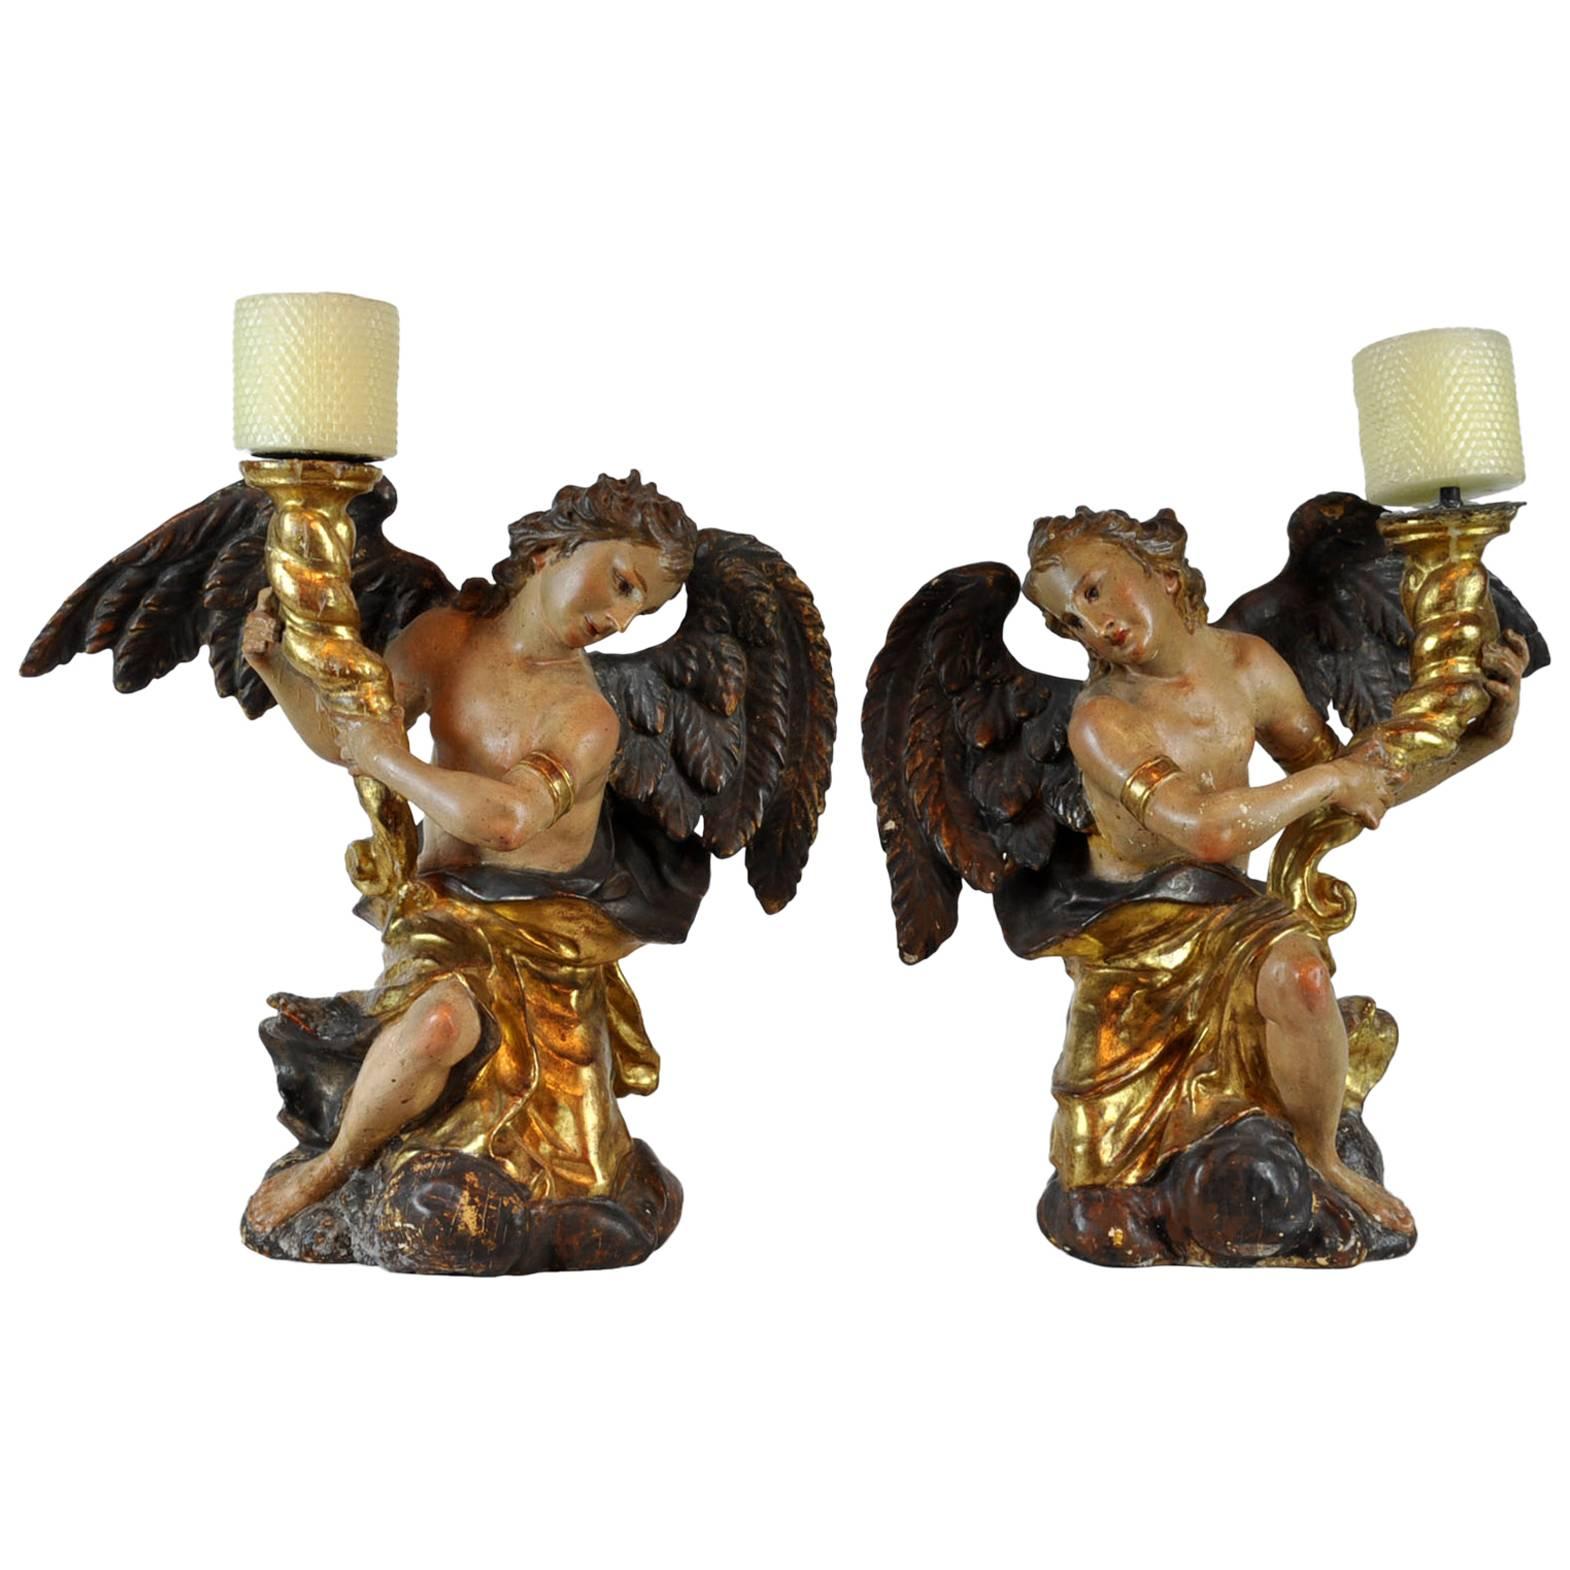 Pair of Italian Late 18th Century Carved Wood Putti / Angels Candleholders